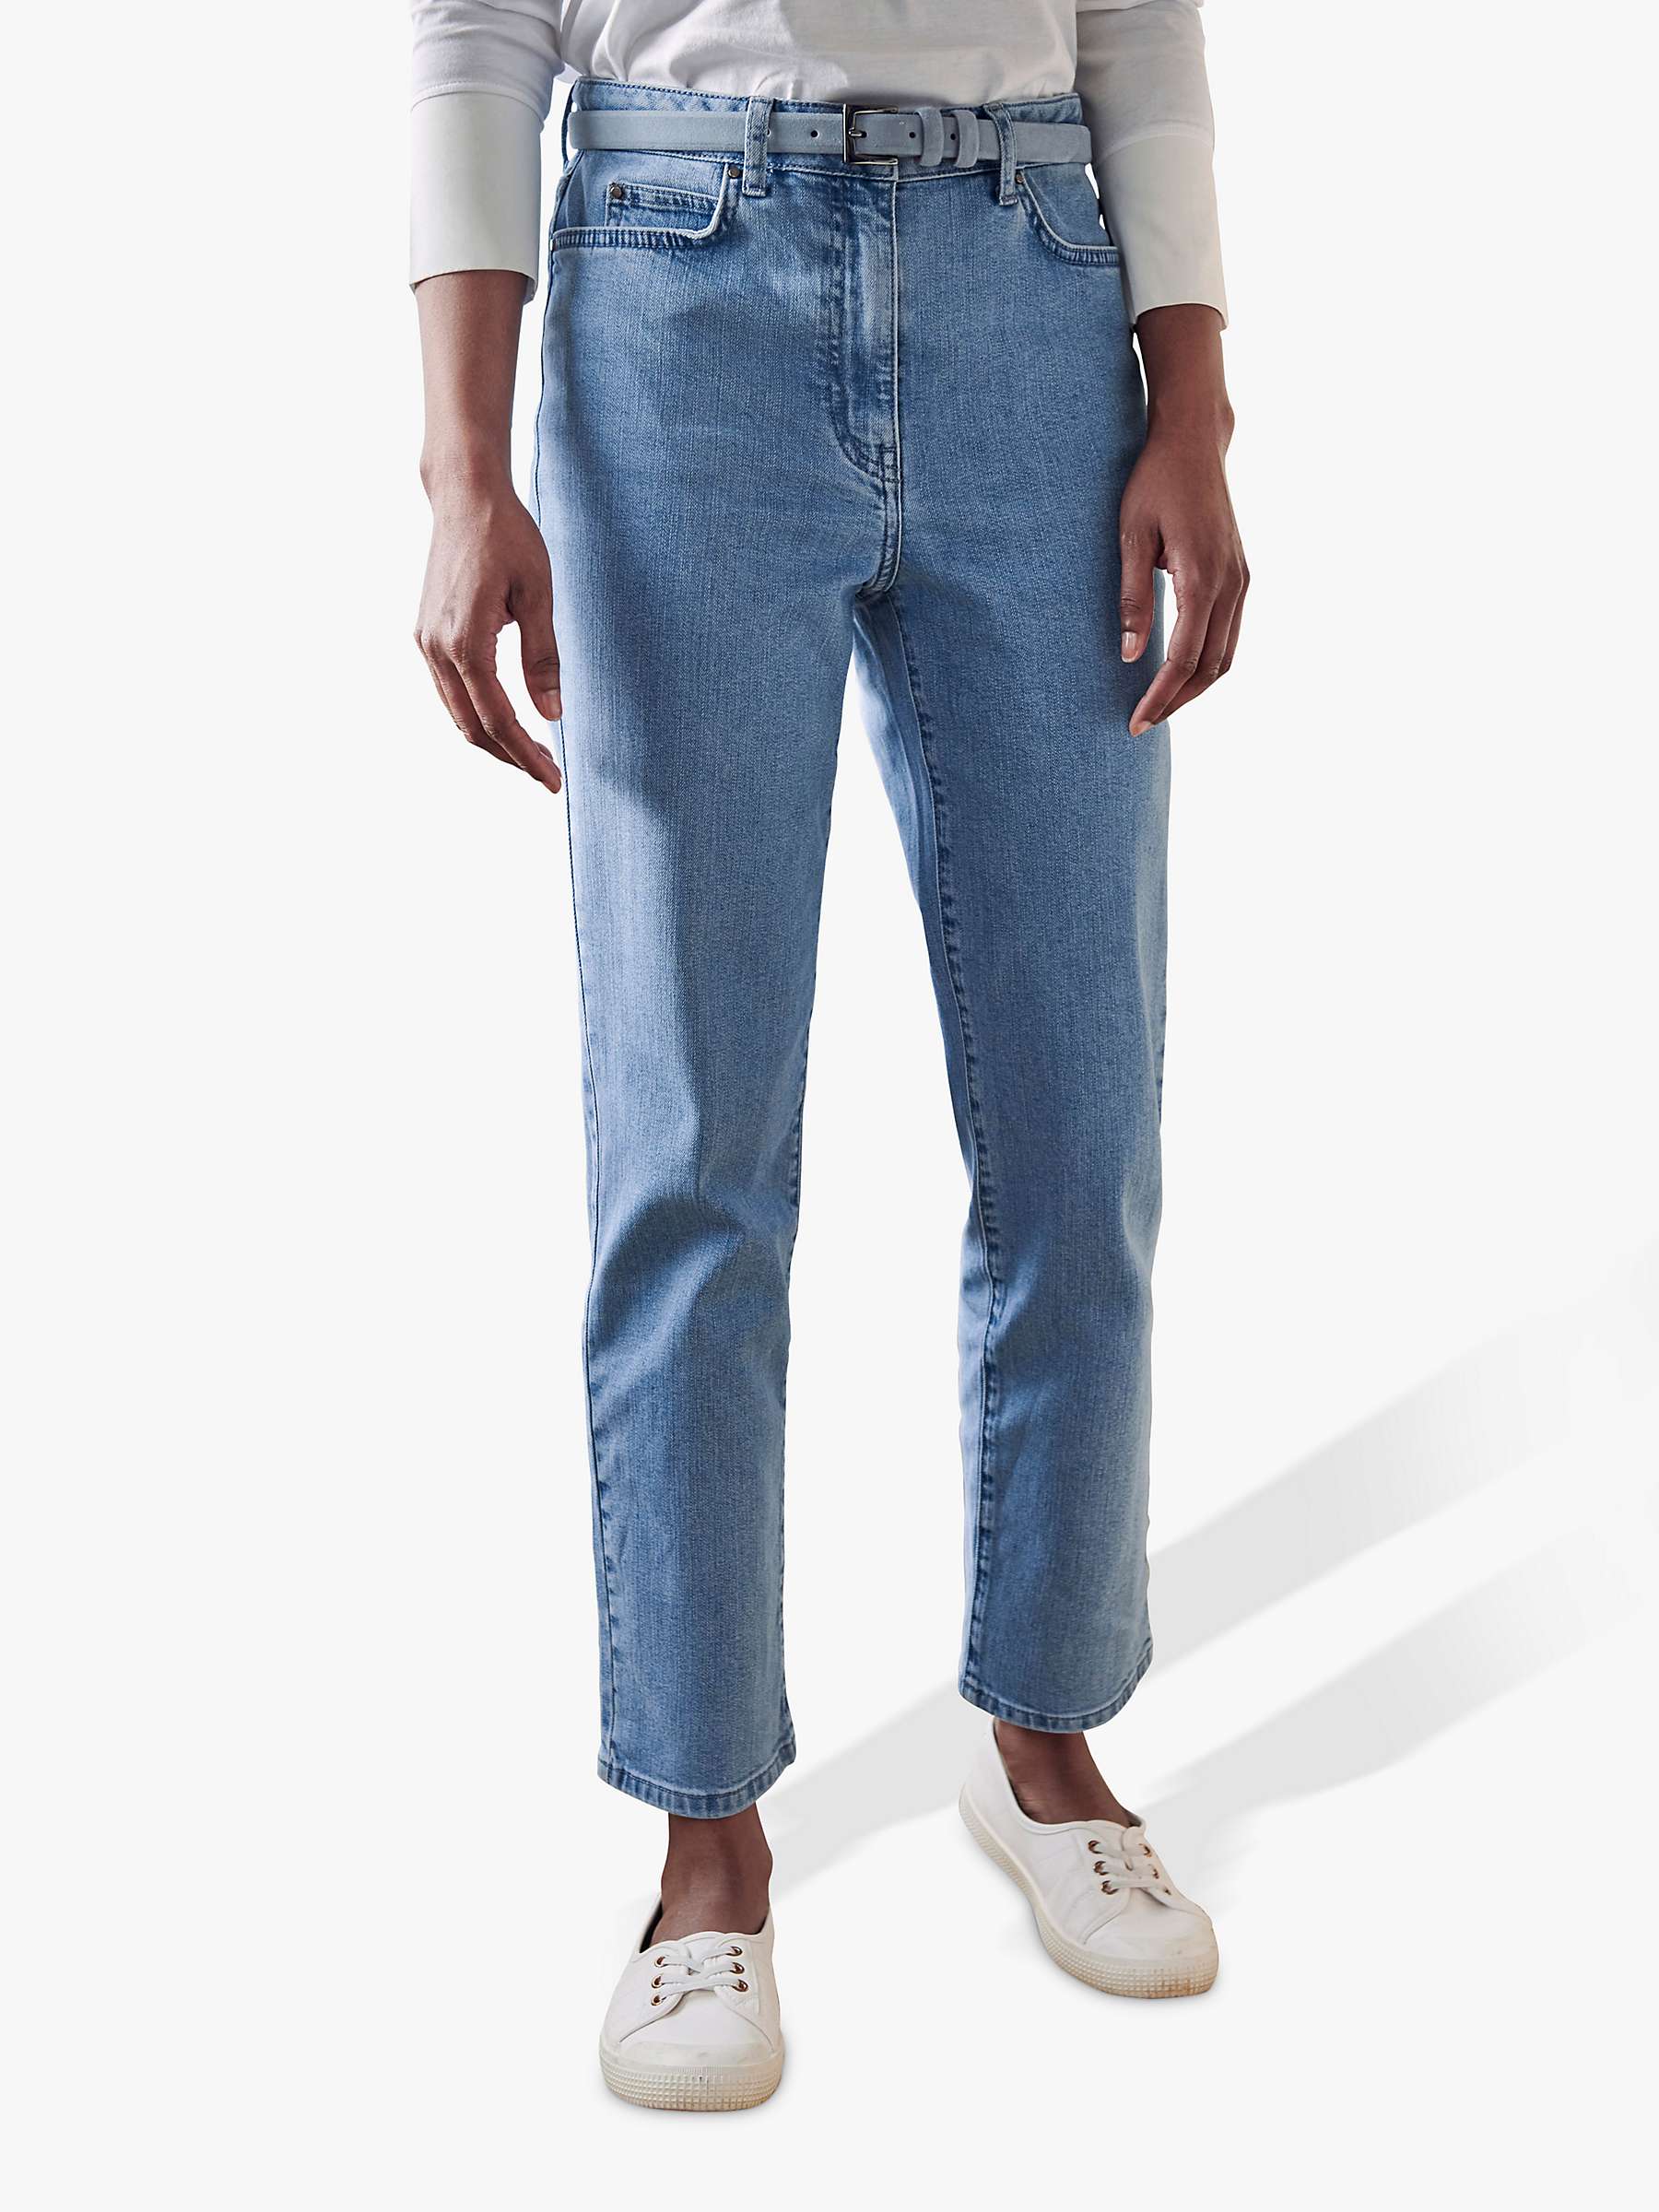 Buy Pure Collection Ankle Grazer Straight Leg Jeans, Light Wash Online at johnlewis.com